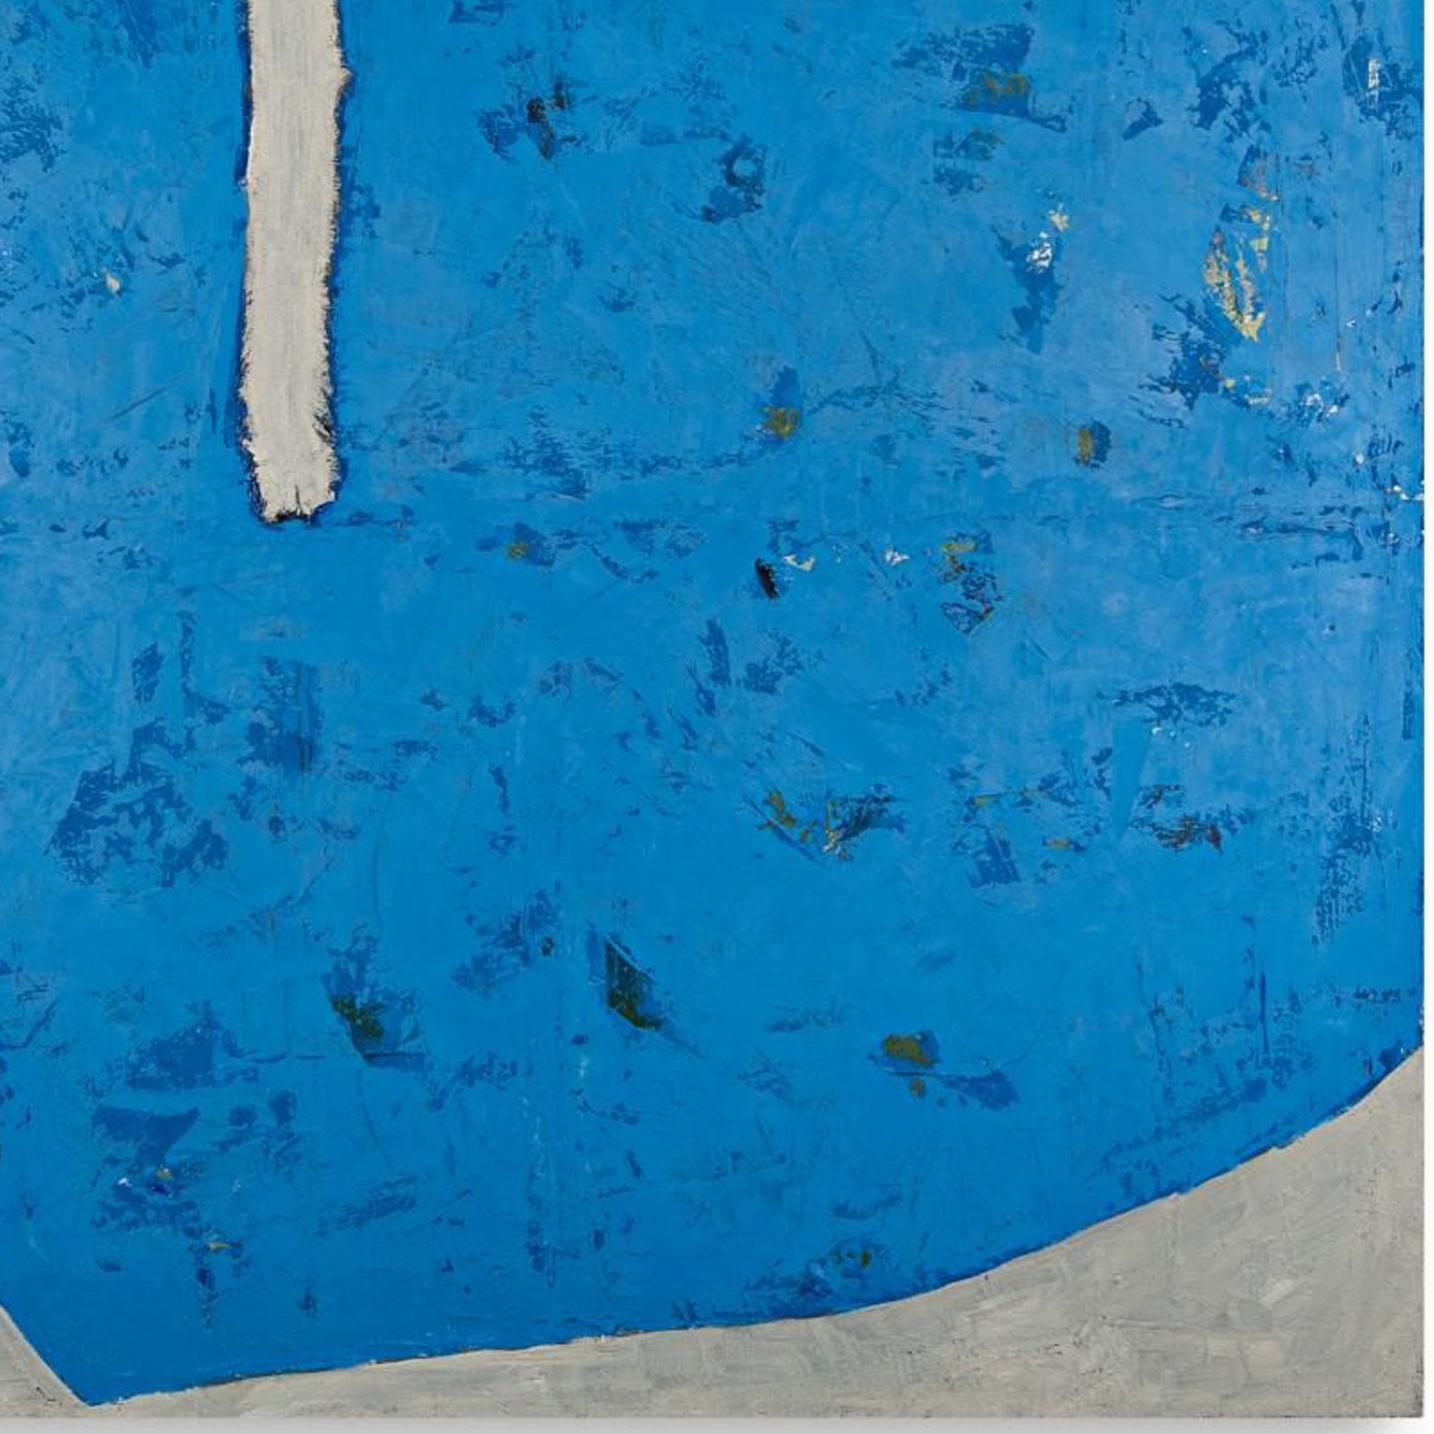 Kim Fonder, COBALTO BLU I, Mixed Media on Burlap, 80.00 X 80.00 in, $9,700.00

Kim Fonder loves texture and touch. Her paintings and furniture reflect her infatuation with these two characteristics. From the materials Fonder selects, to the way she